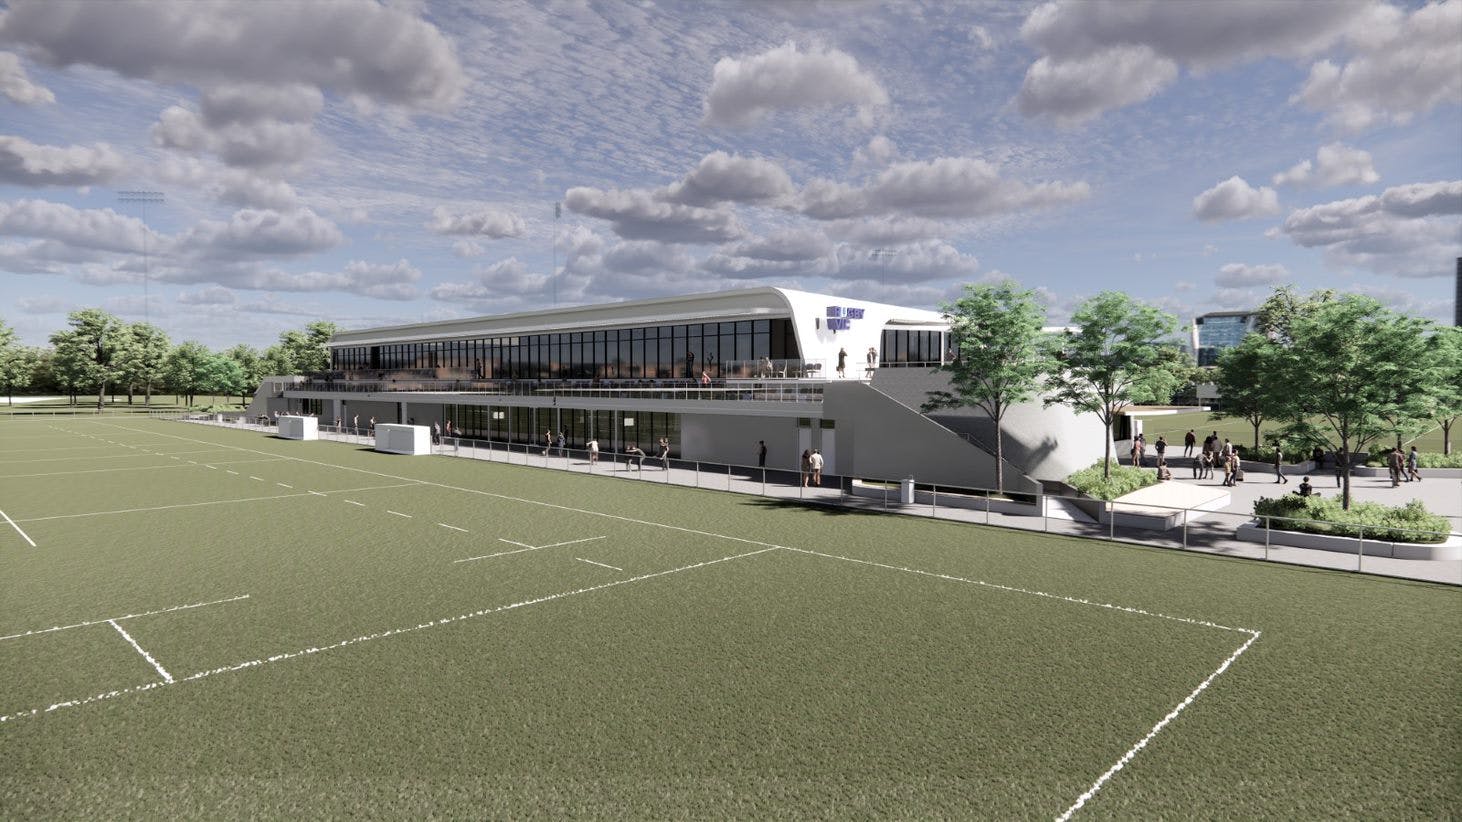 The State Rugby Centre of Excellence will provide Victoria with vital infrastructure to support the ongoing development of local Victorian talented player pathways and community impact programs.